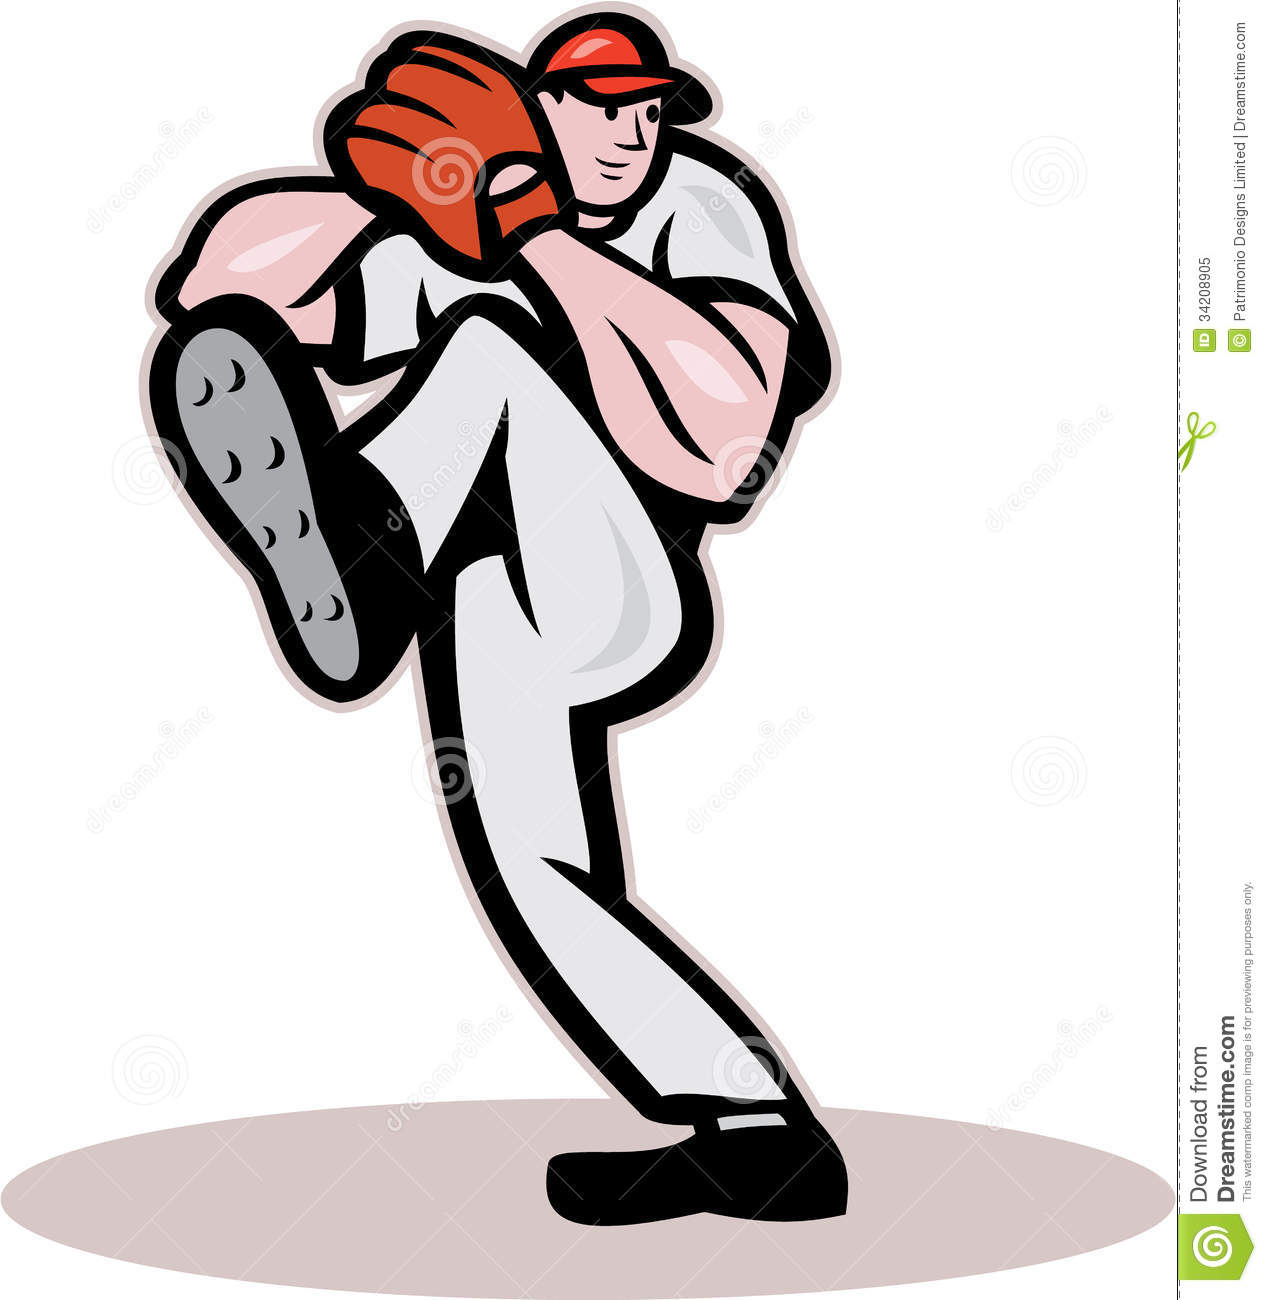 Illustration Of A American Baseball Player Pitcher Outfielder Throwing